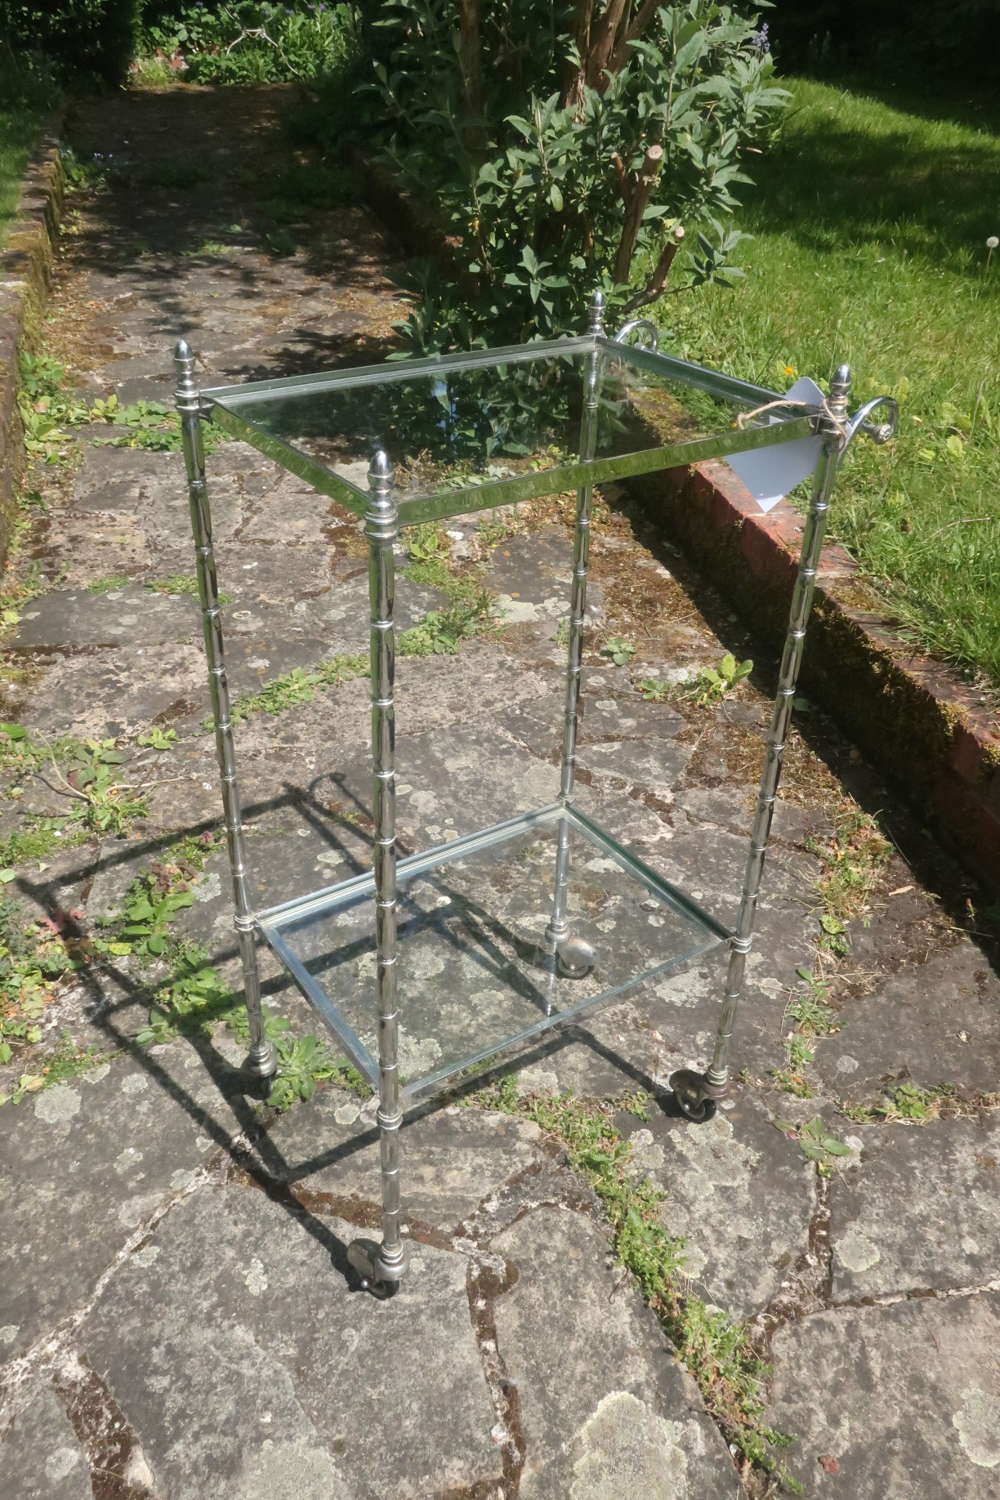 Small silver plate trolley or bar cart